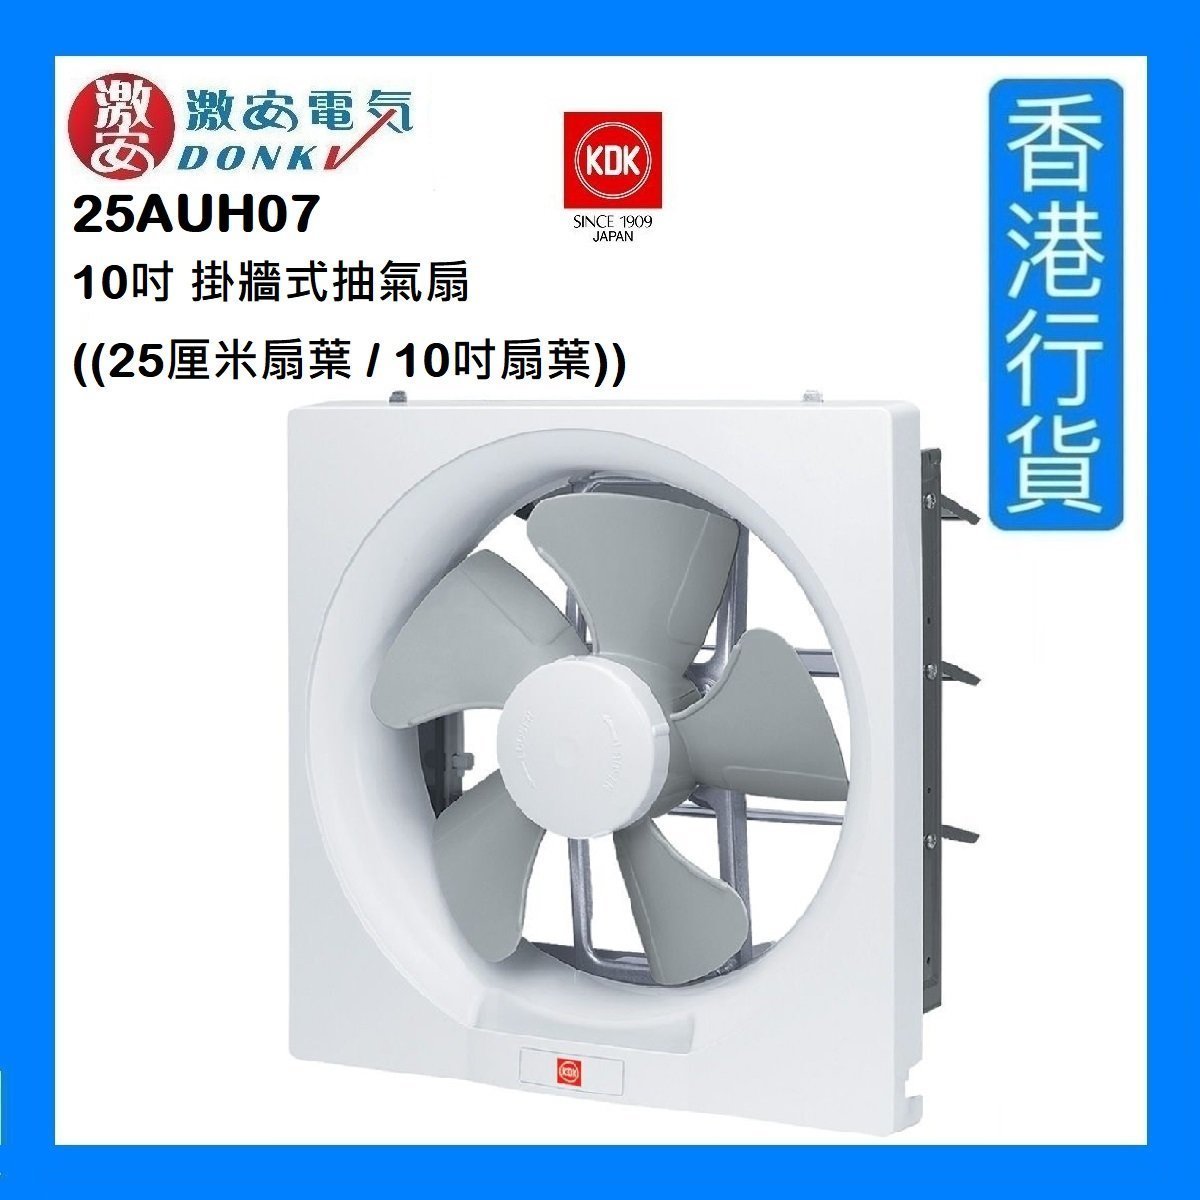 25AUH07 10" Wall Mount Type Ventilating Fan ((25cm Blade / 10" Blade)) [Authorized Goods]